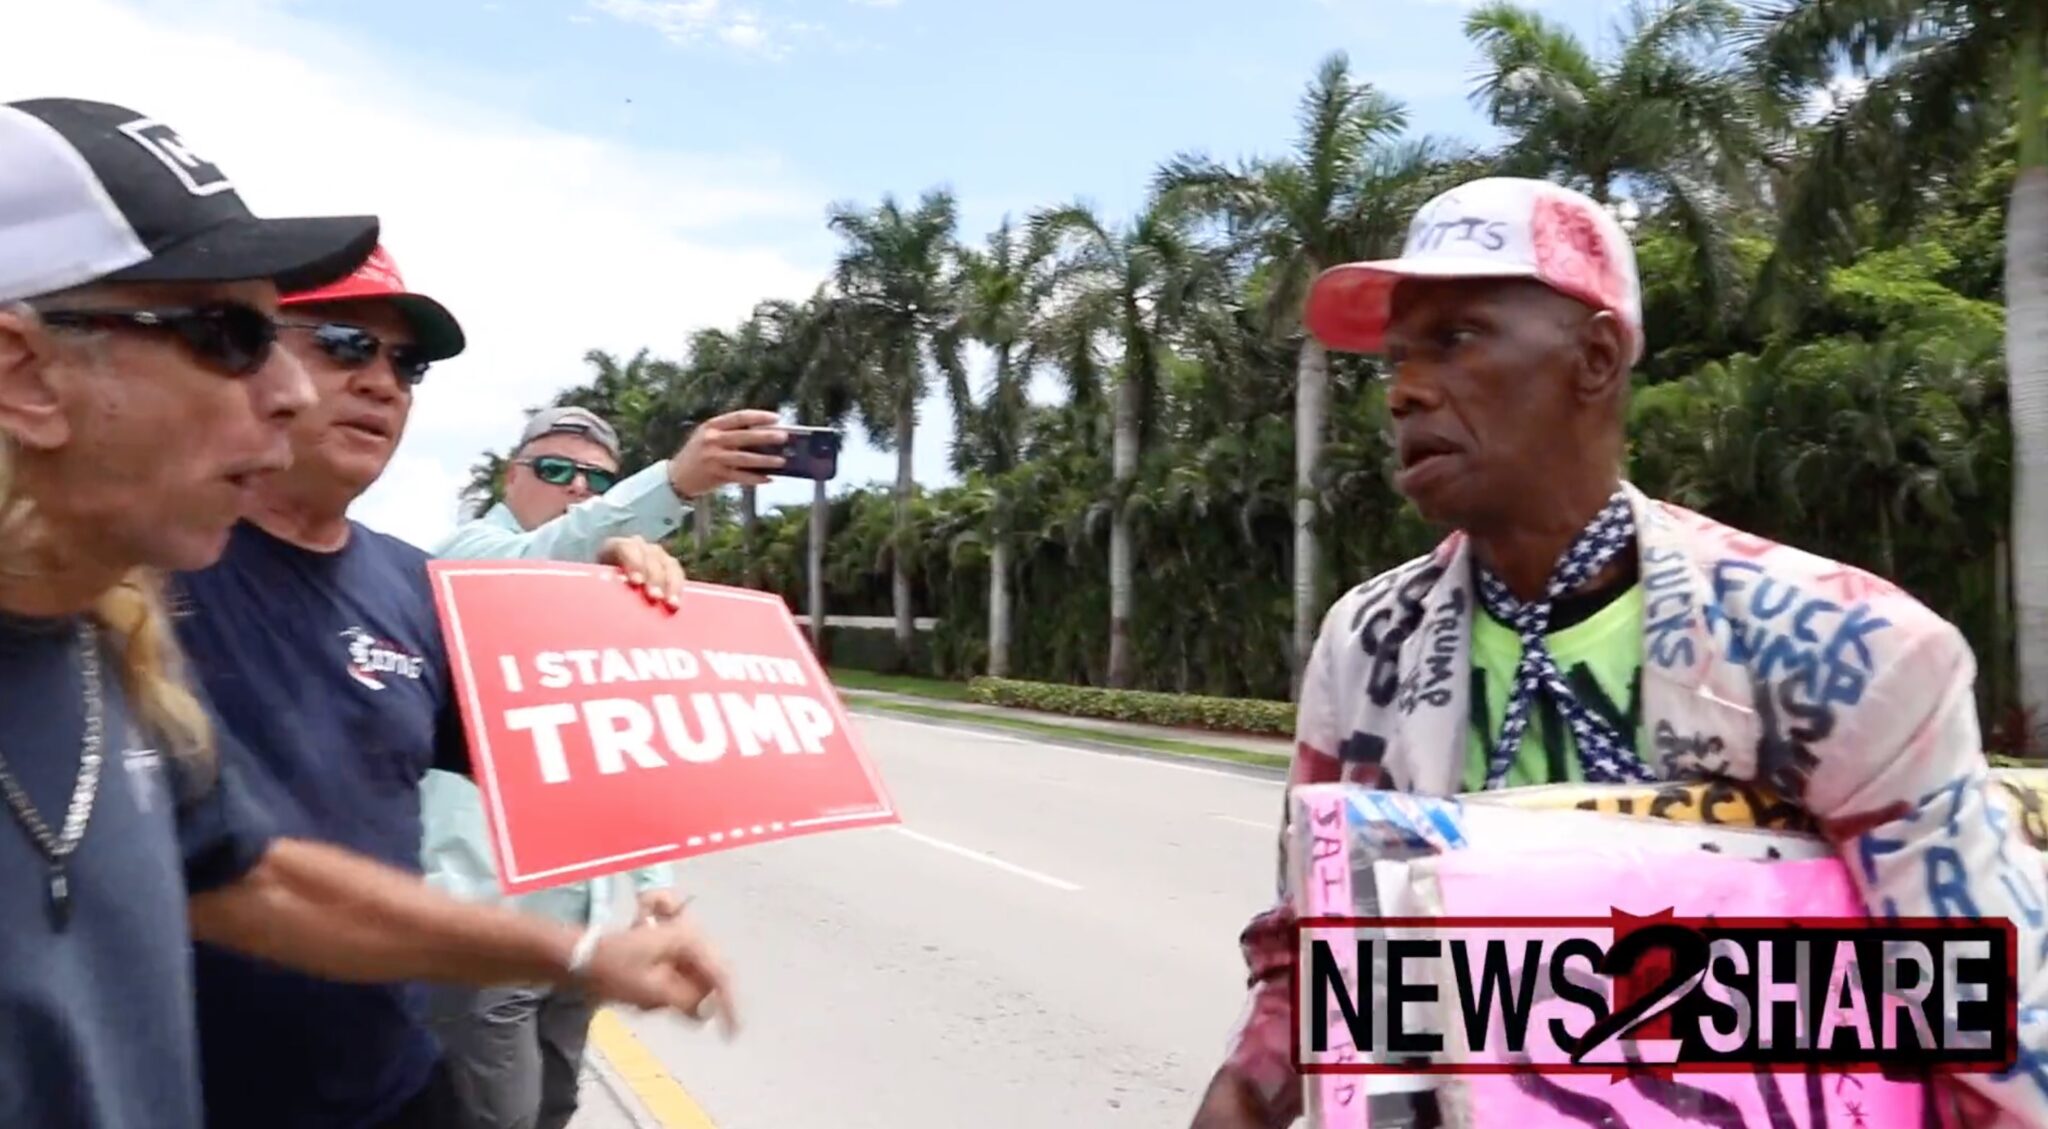 Trump Supporters Gang Up on Protester Ahead of Arraignment in Florida: ‘Get the F*ck Out of Here!’ (mediaite.com)